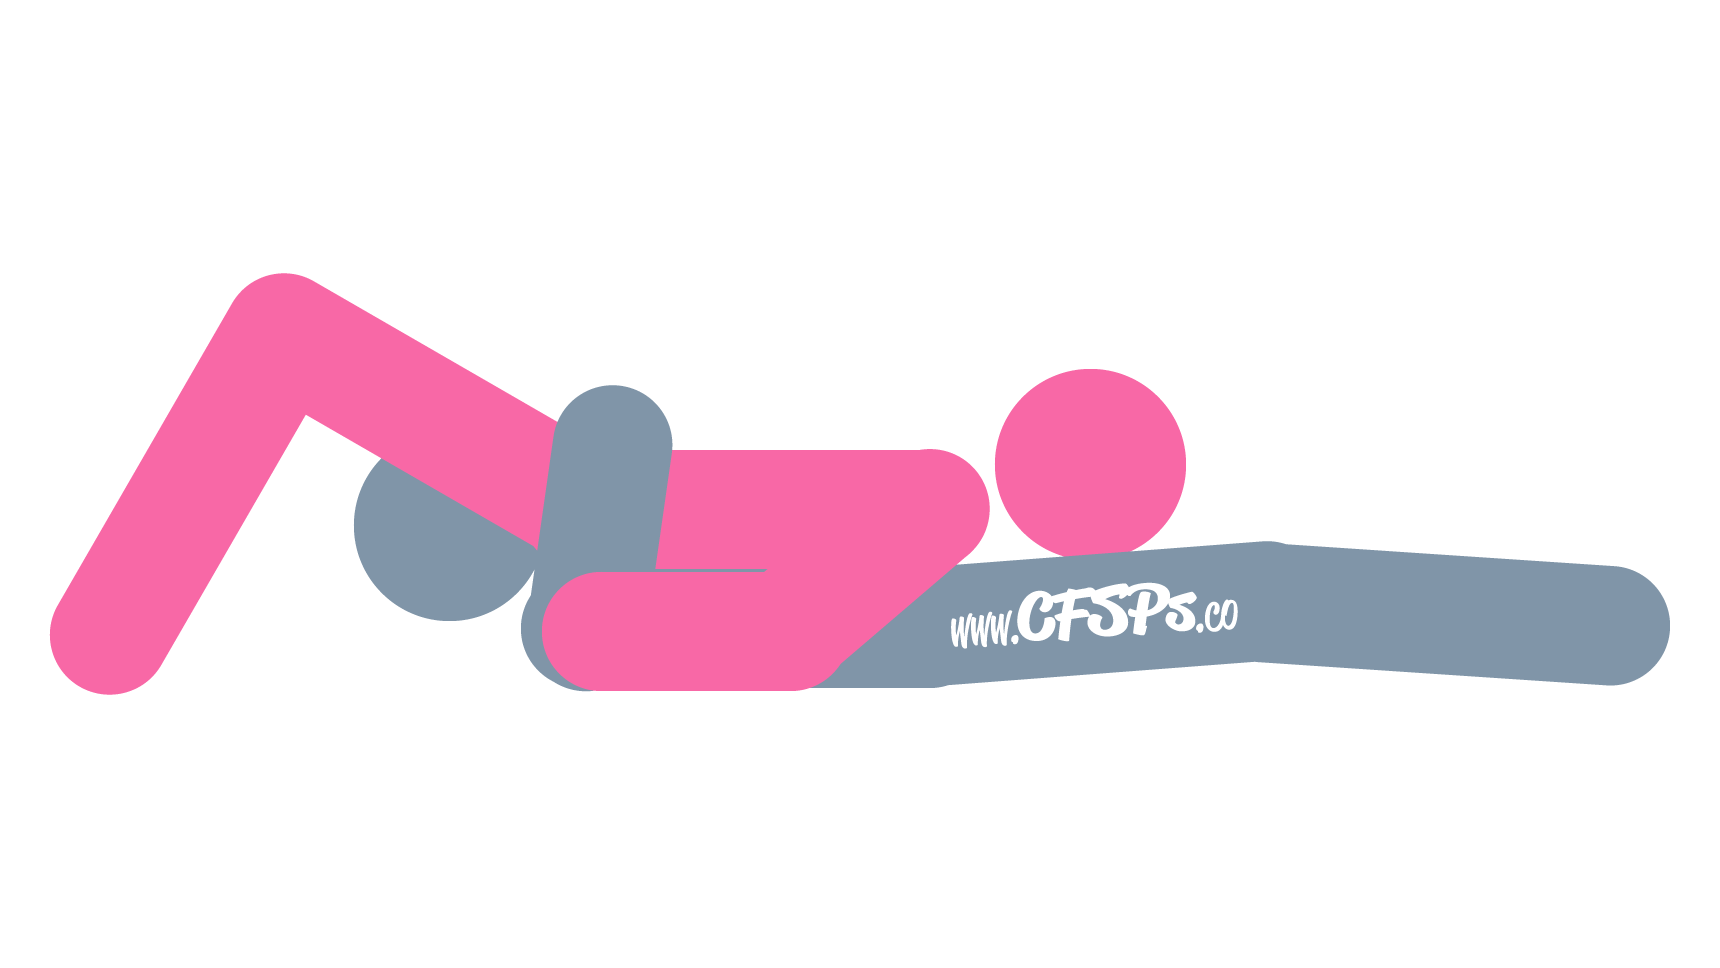 This stick figure image depicts a man and woman engaging in oral sex in the 68 – Hers cunnilingus sex position. The man is lying on his back. The woman is lying on her back on top of the man with her pelvis near his face and head resting on his lap.